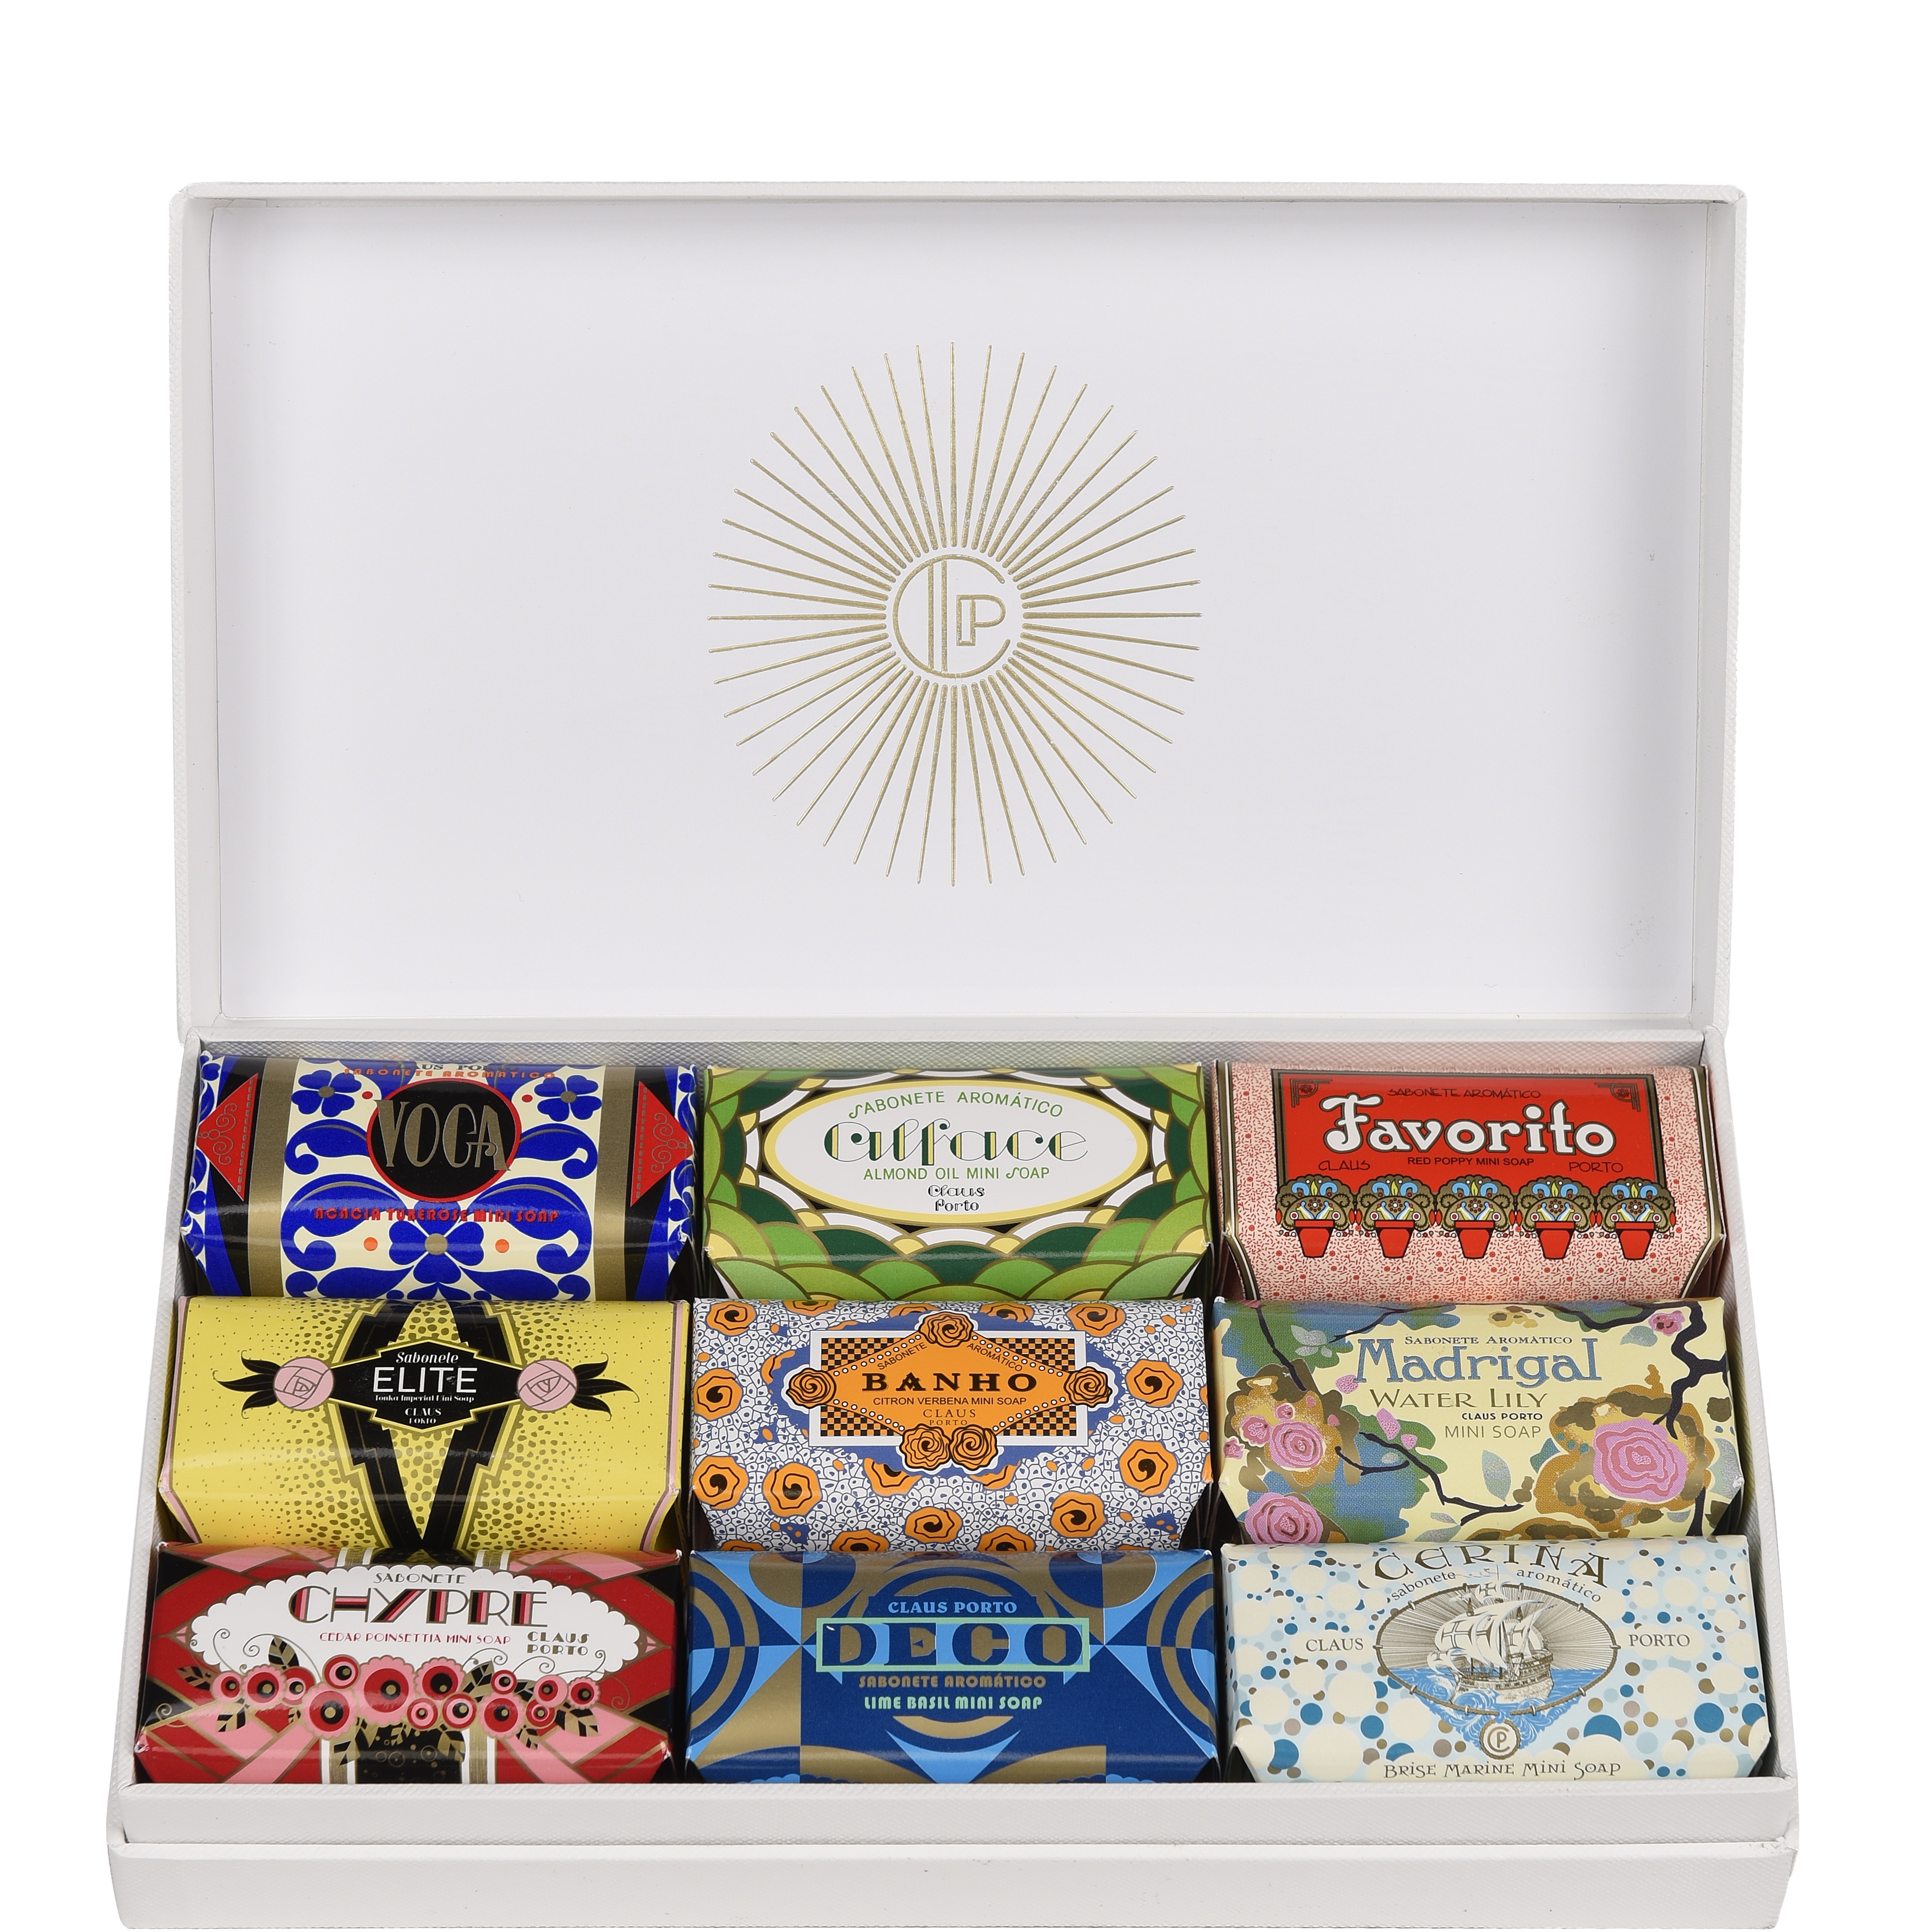 Tester - Luxe Gift Box Hand- & Body Soap - Deco